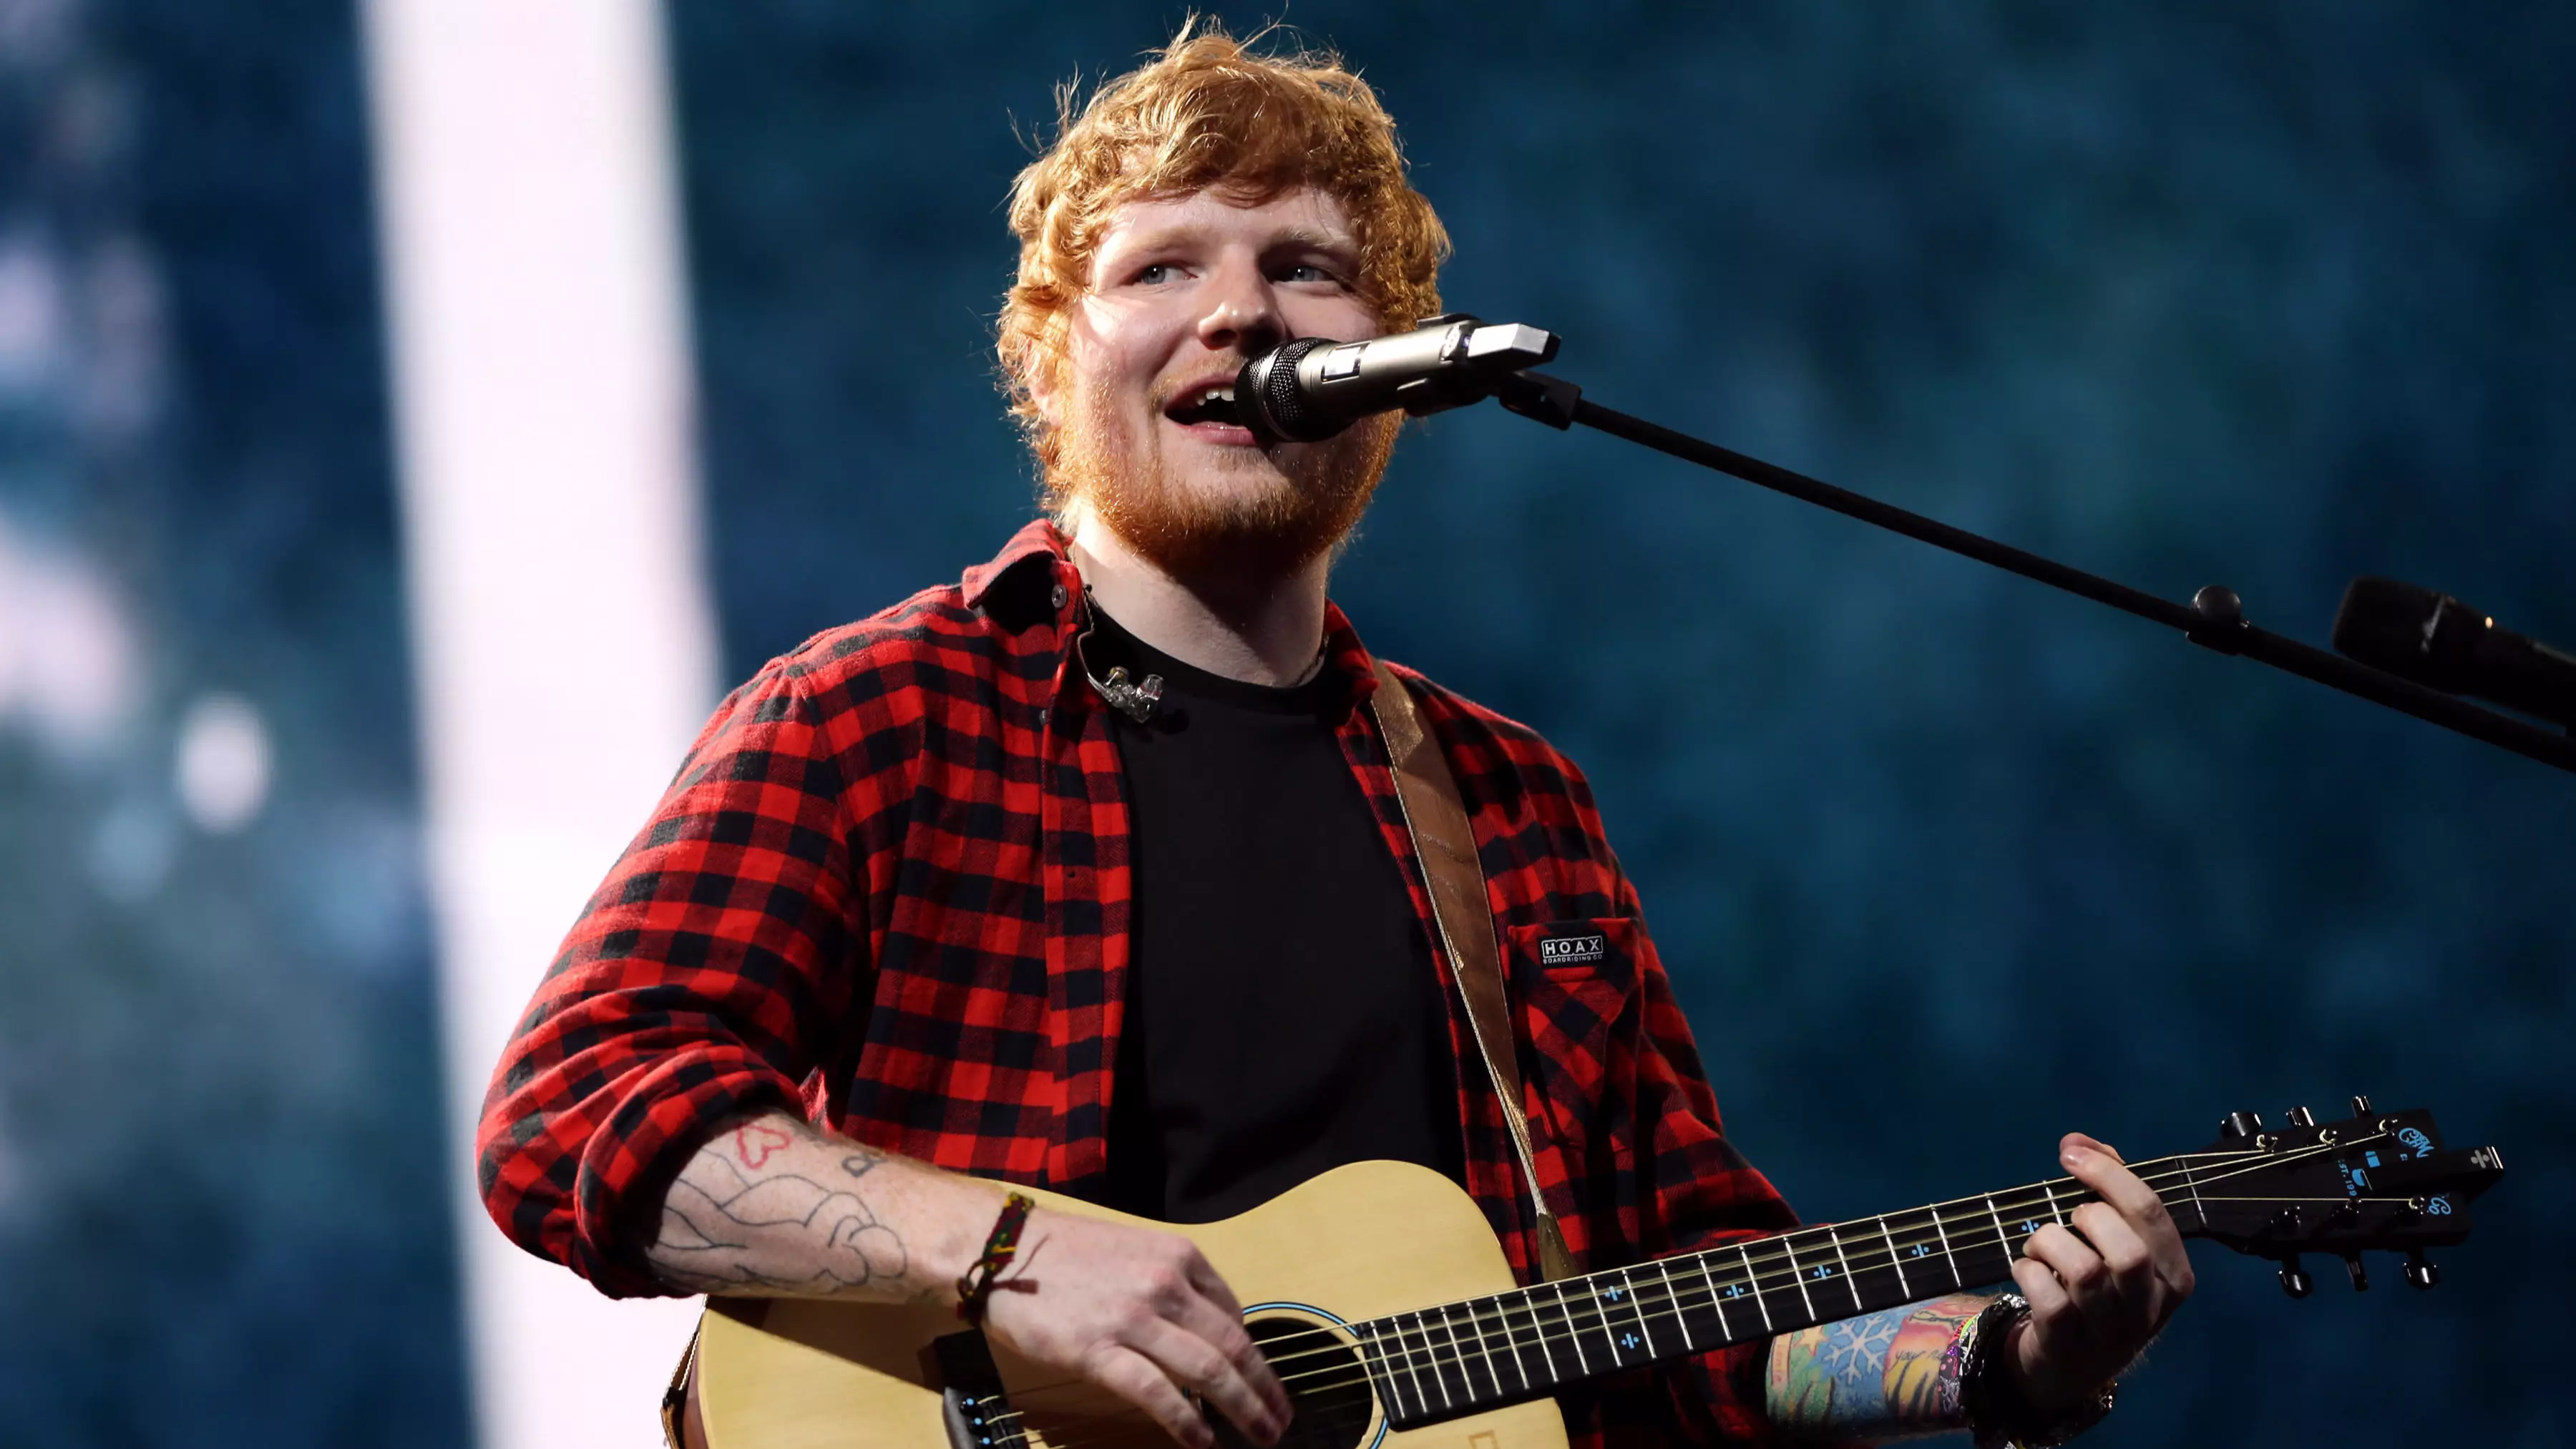 Doctors Told Ed Sheeran He’d Never Be Able To Play Guitar Again If He Didn’t Postpone Tour